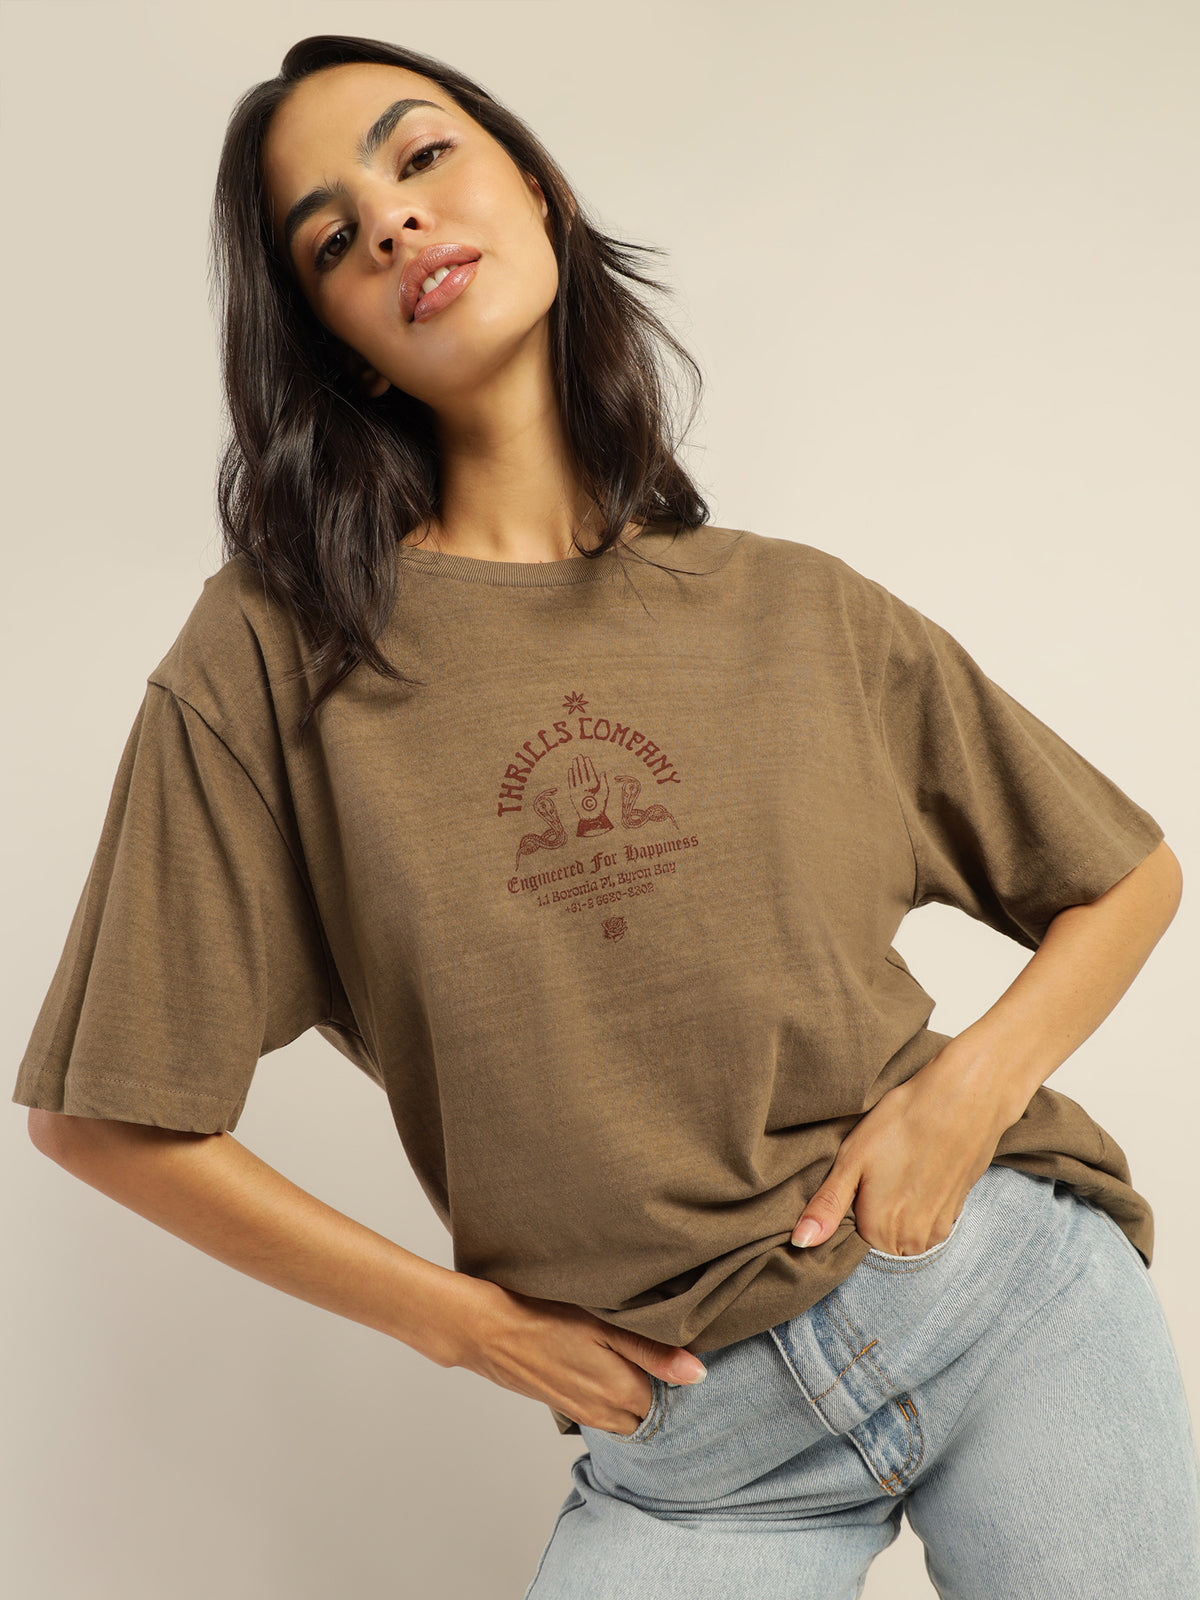 Engineered For Happiness Merch Fit T-Shirt in Desert